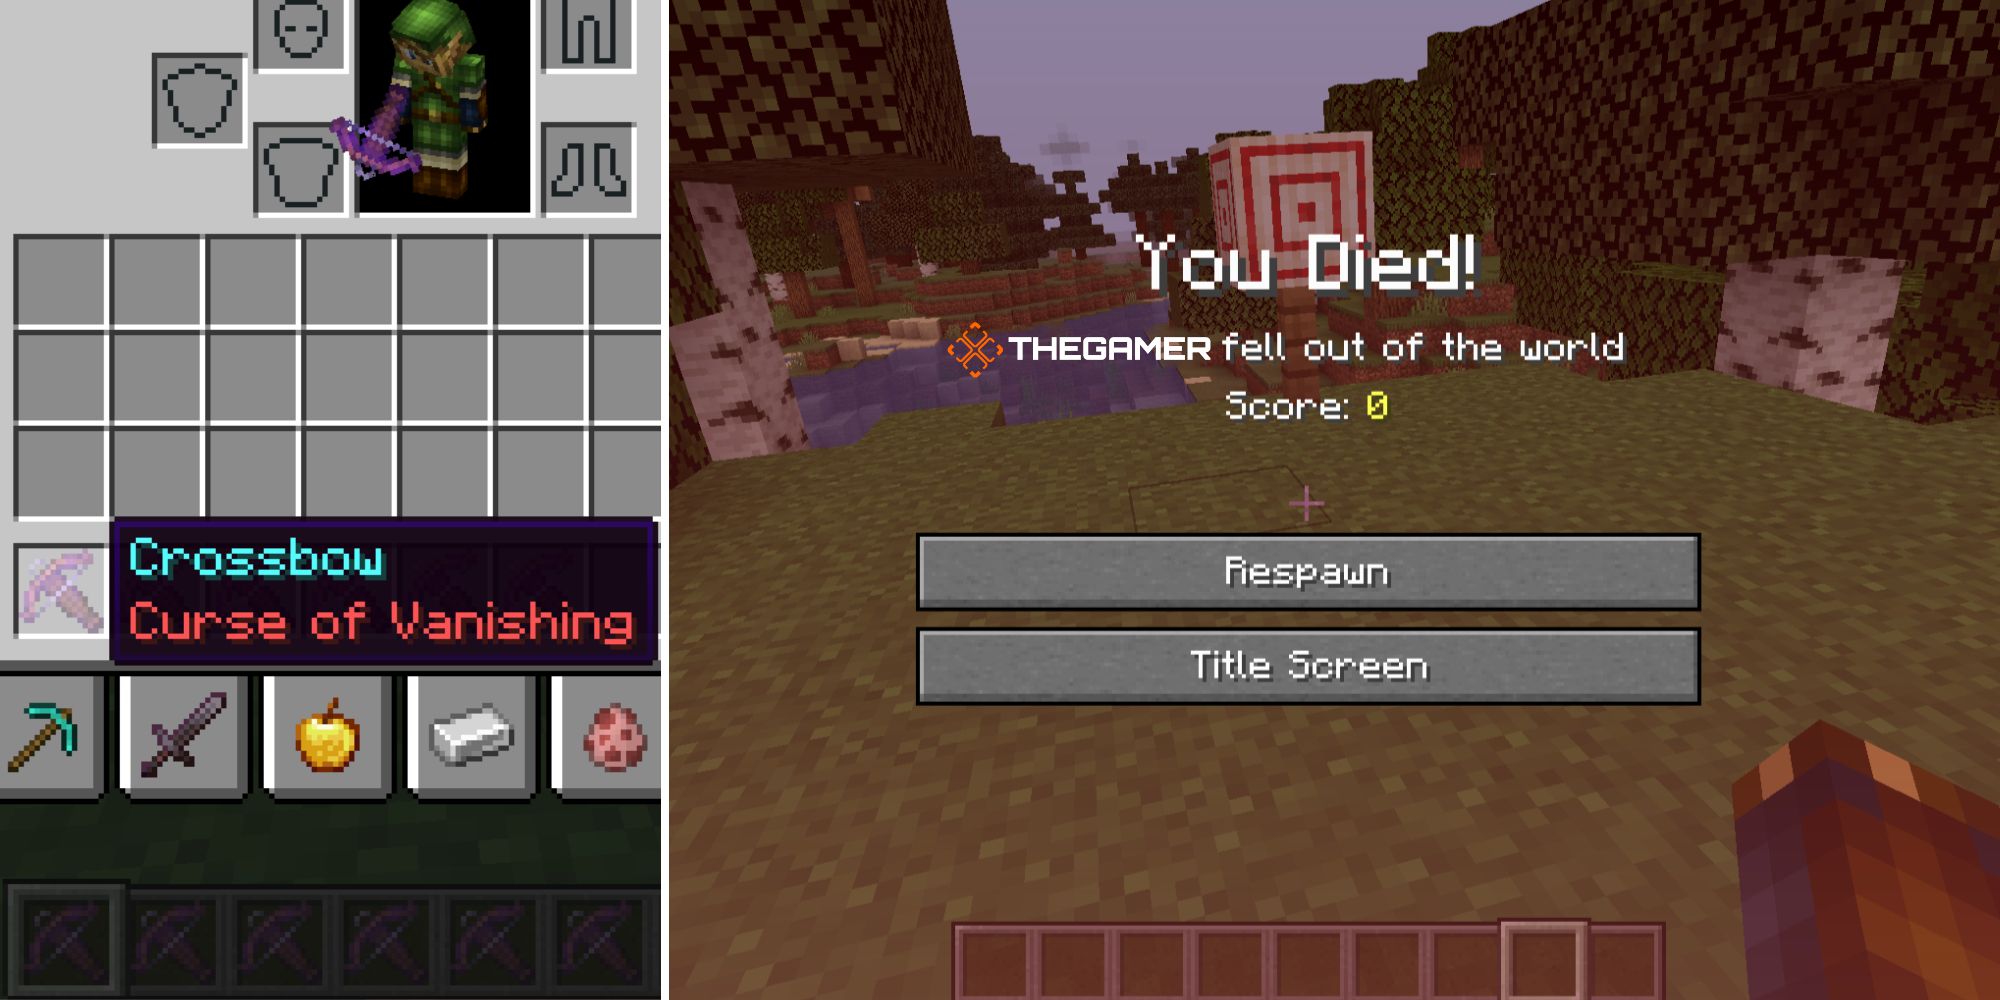 A crossbow enchanted with Curse of Vanishing and the player death screen.